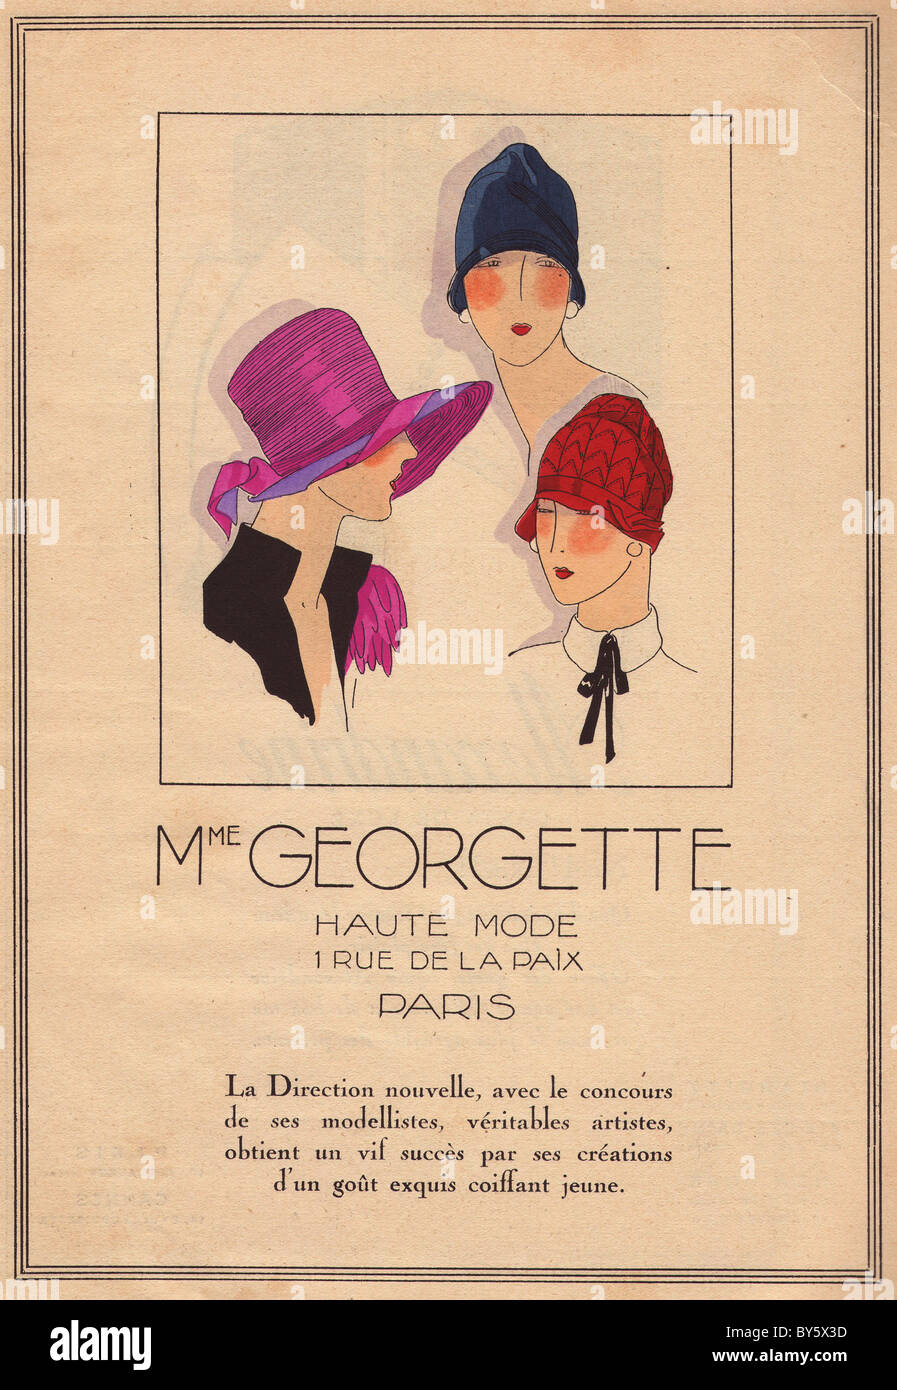 1920s women's hat advertisement from Madame Georgette, Paris. Stock Photo